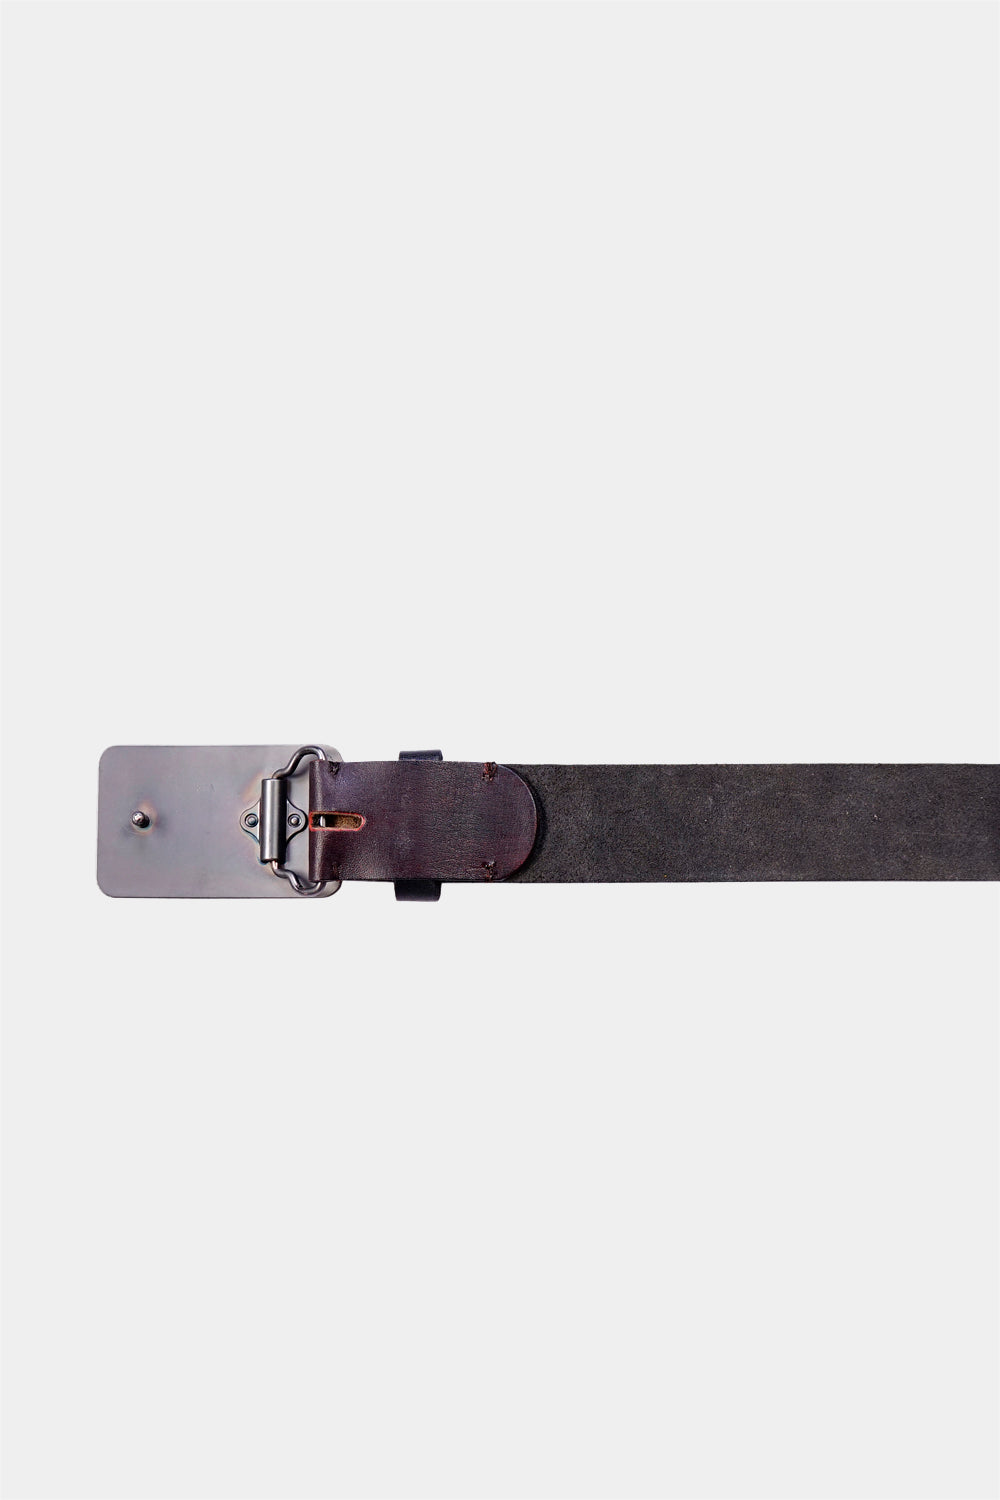 Justanned Mens'S Copper Buckle Leather Belt